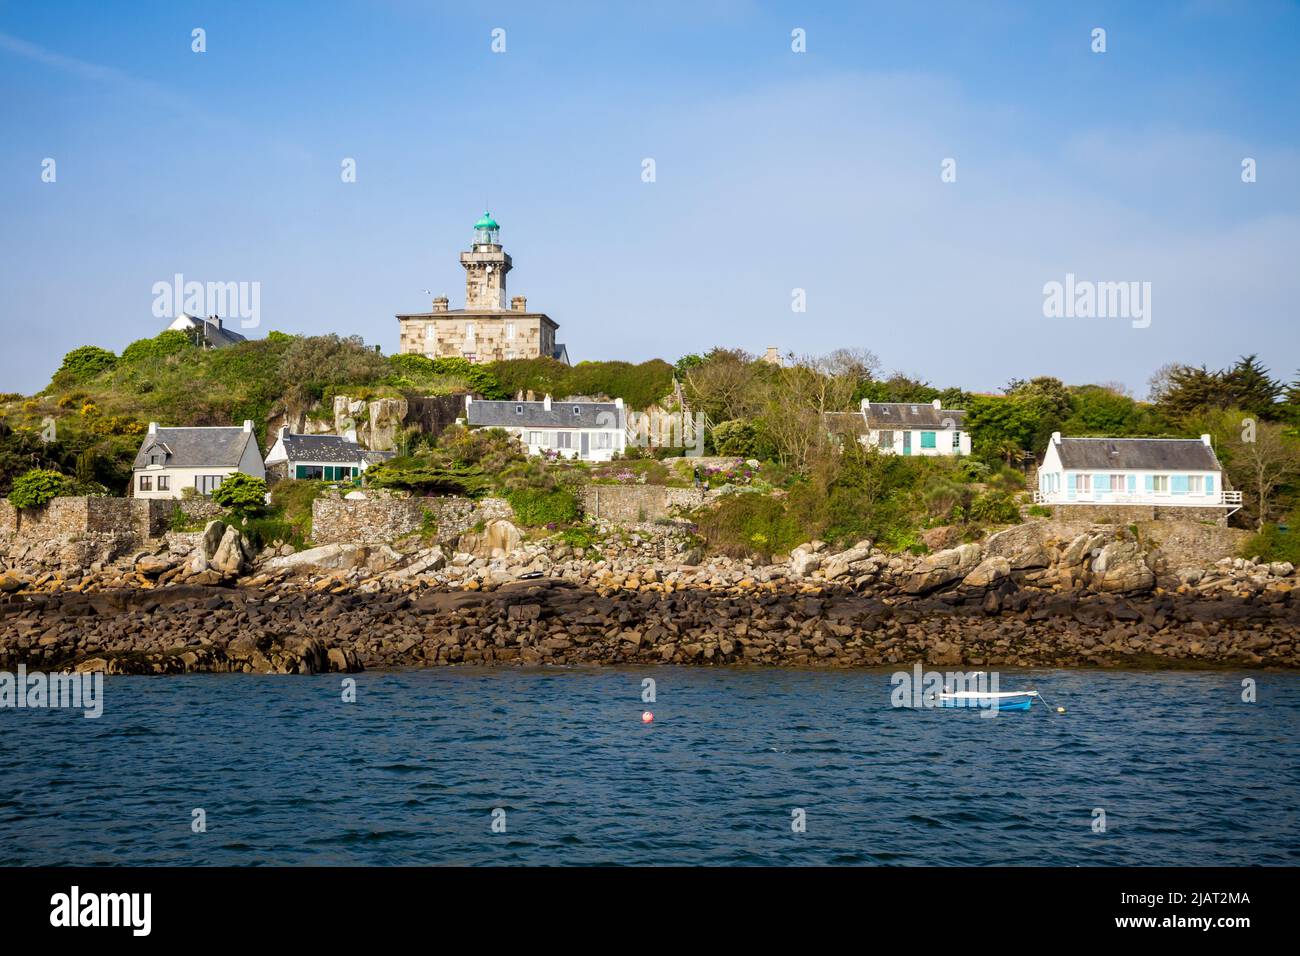 Chausey island coast and lighthouse in Brittany, France Stock Photo